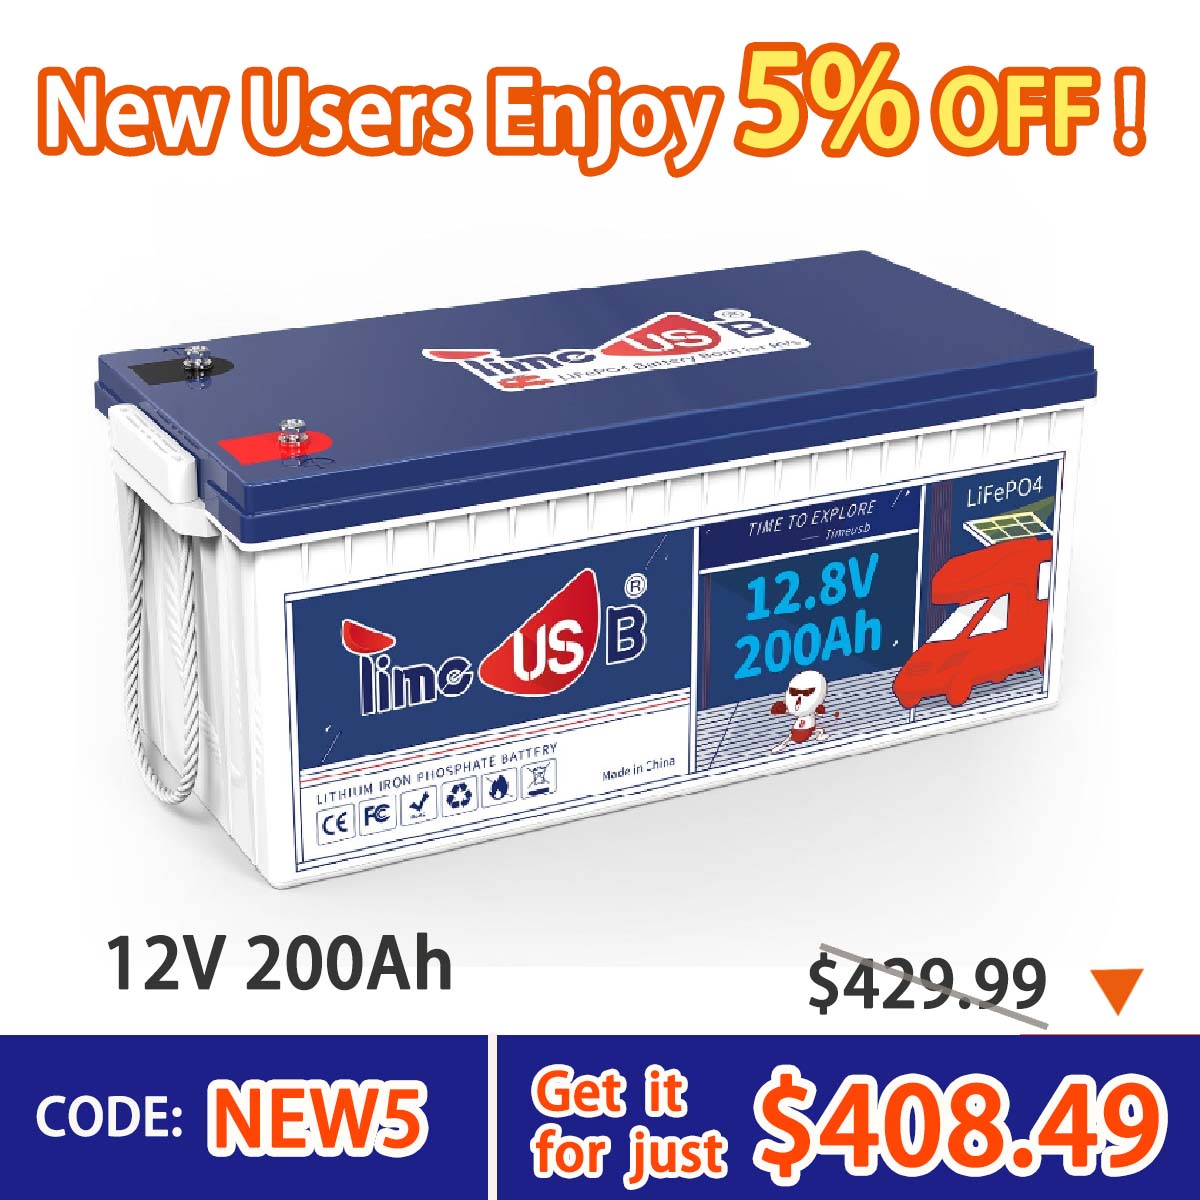 Timeusb 12V 200Ah LiFePO4 Battery, 2560Wh & 100A BMS